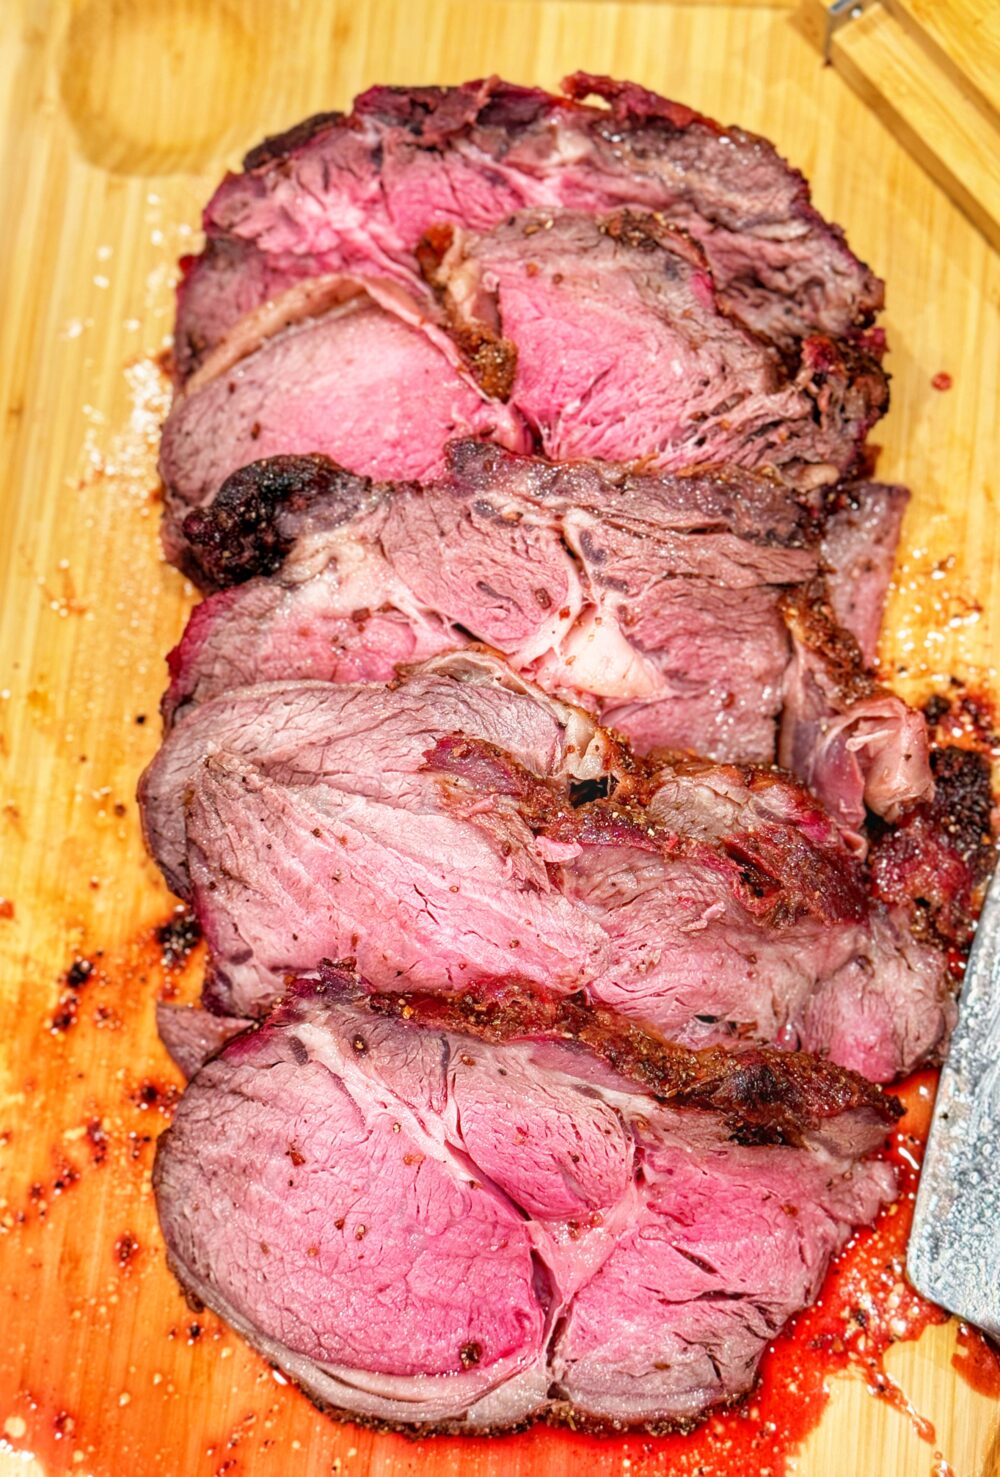 Sliced smoked-fried prime rib on a cutting board.